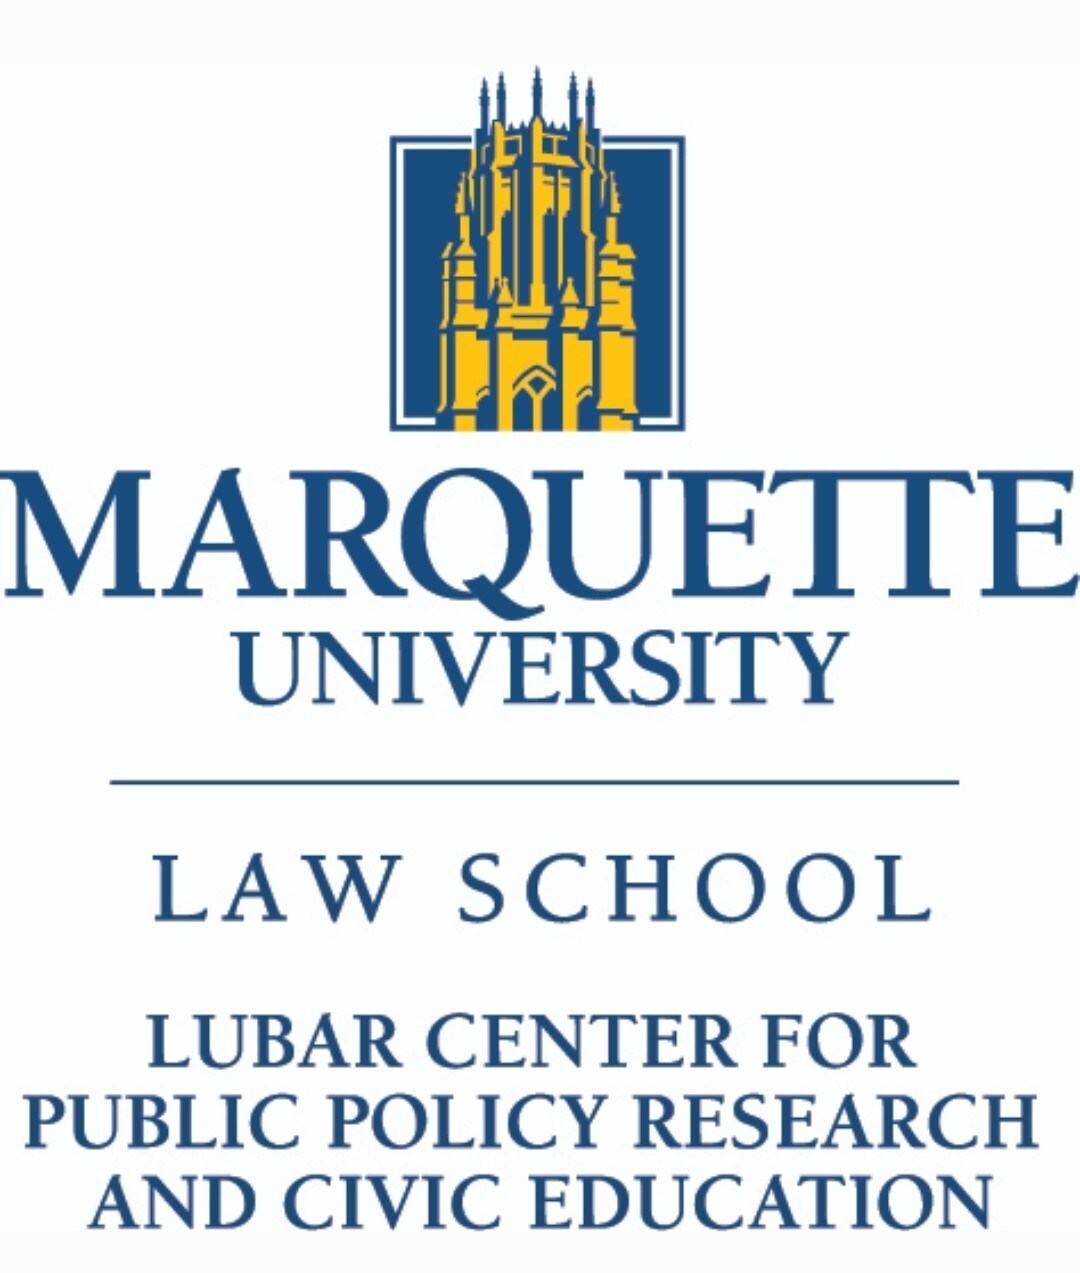 Marquette University Law School - Lubar Center For Public Policy Research and Civic Education